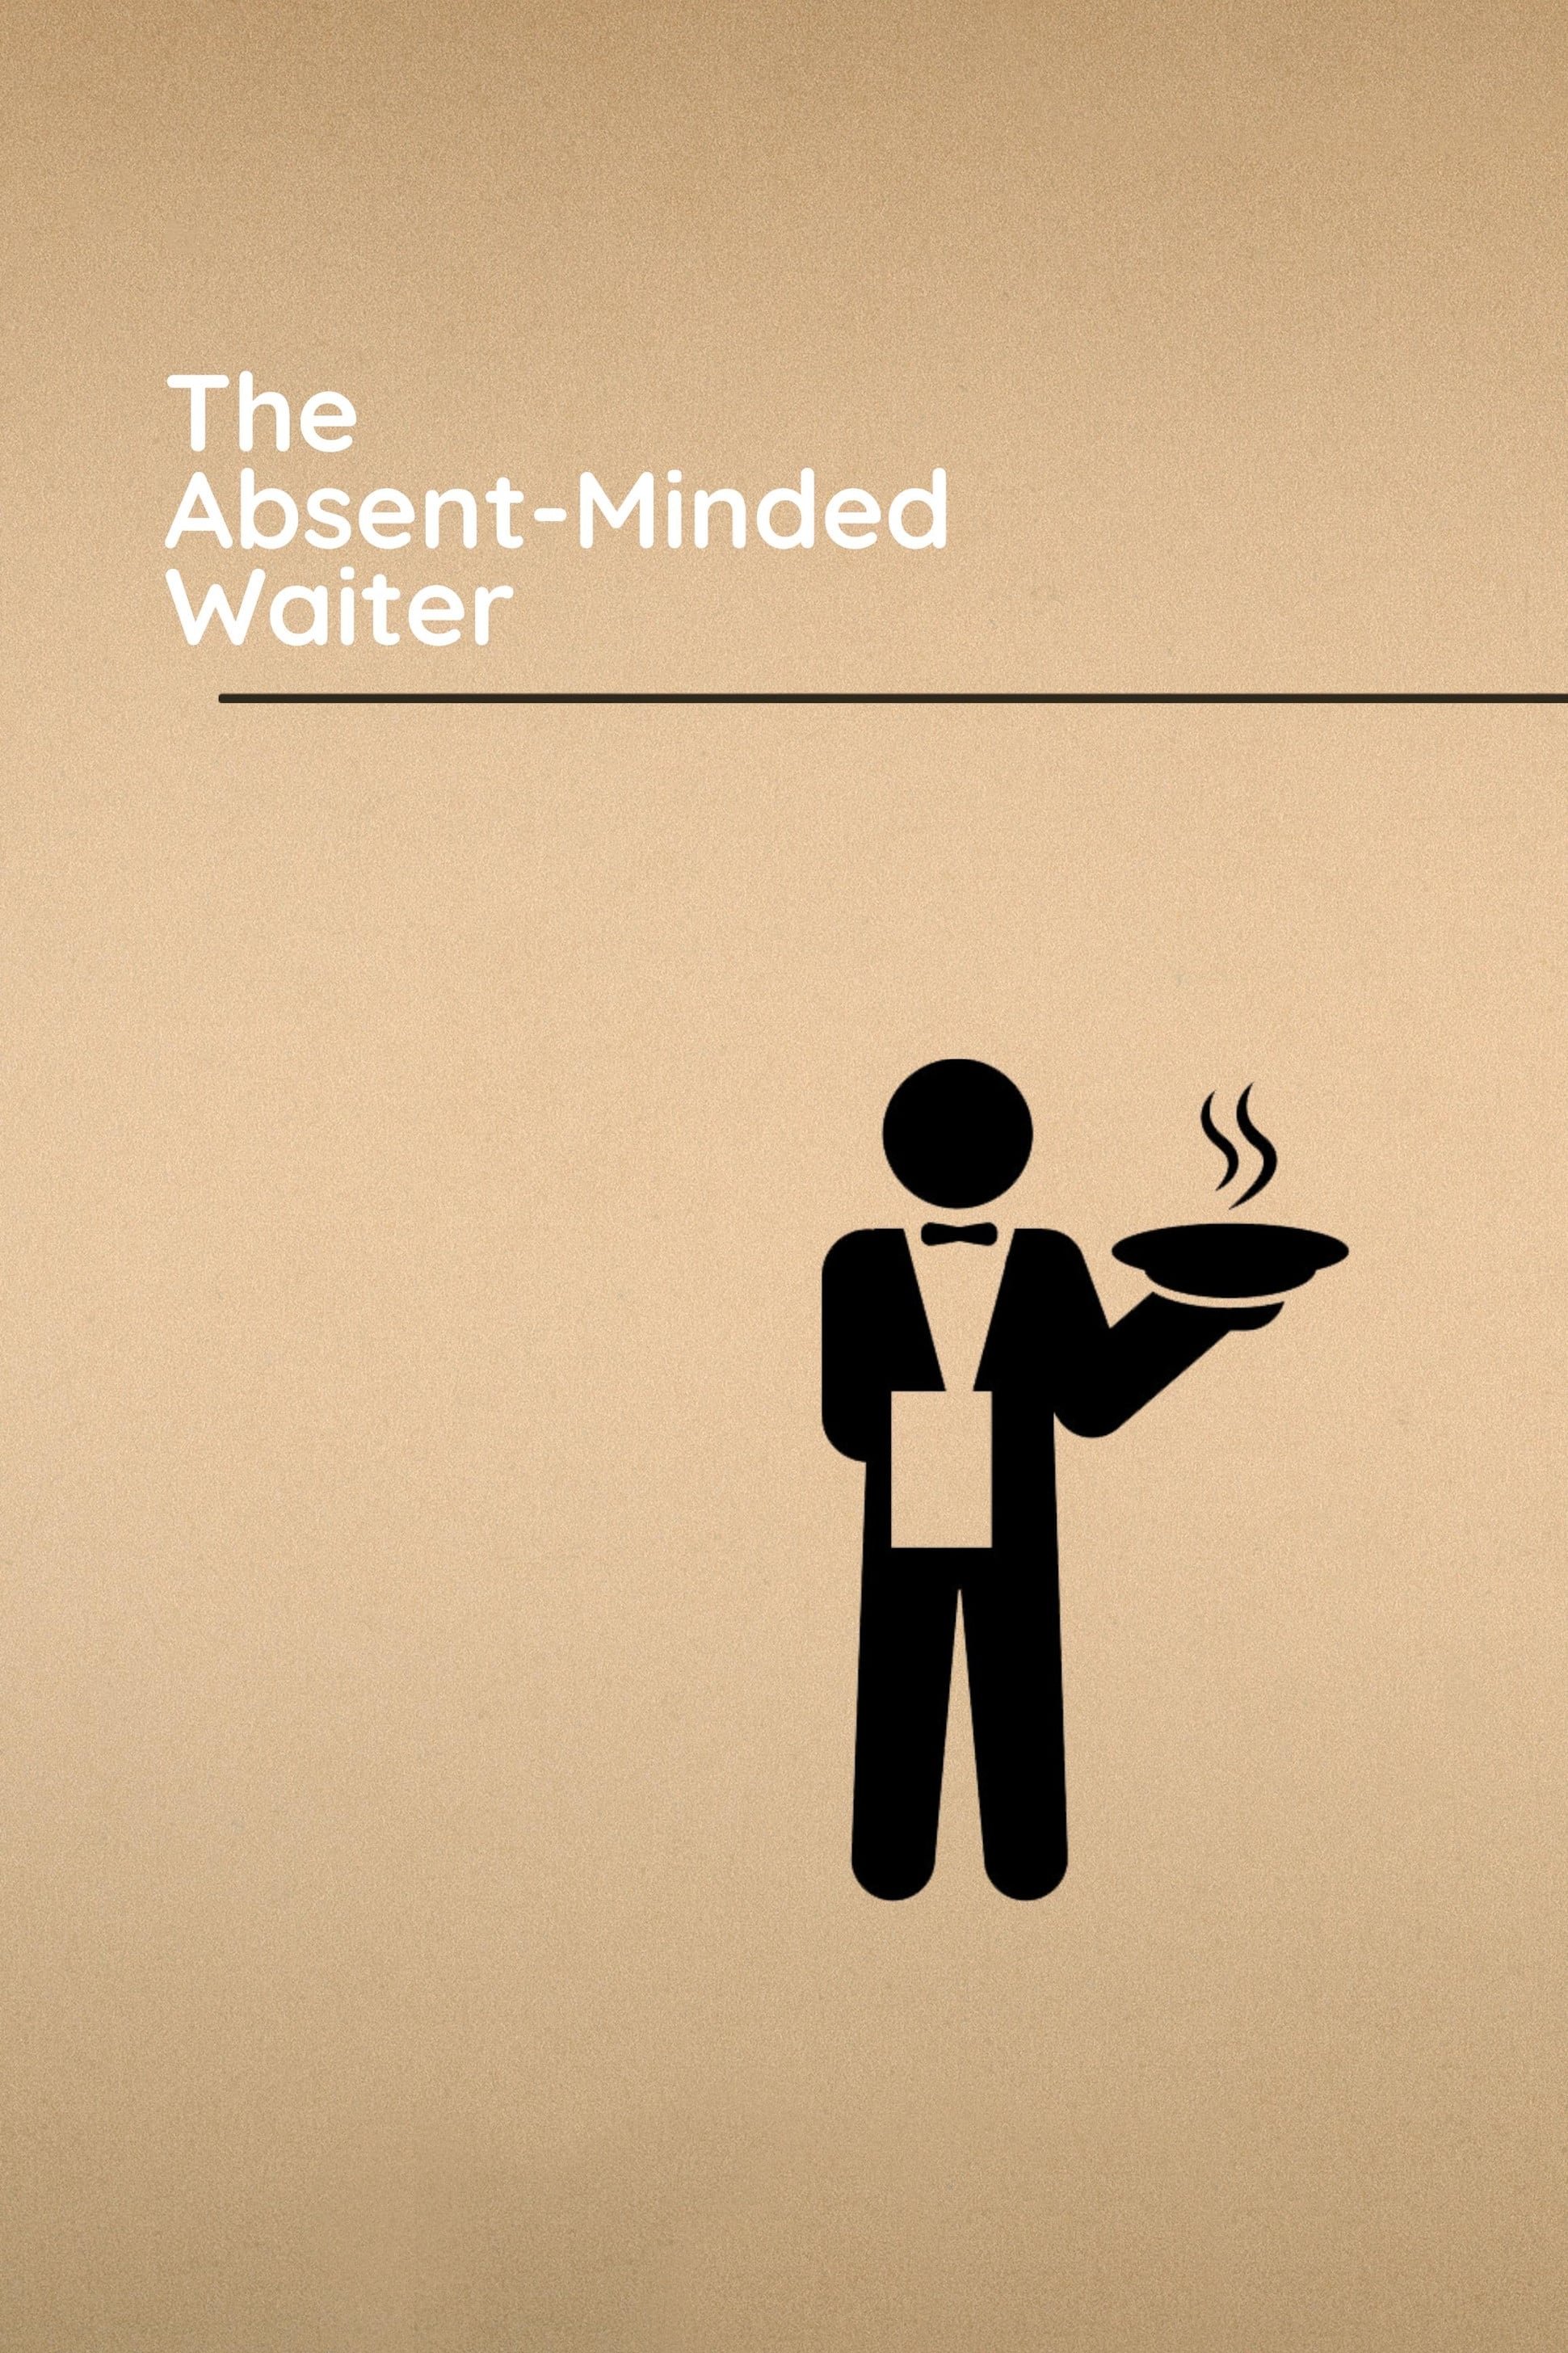 The Absent-Minded Waiter (1977)